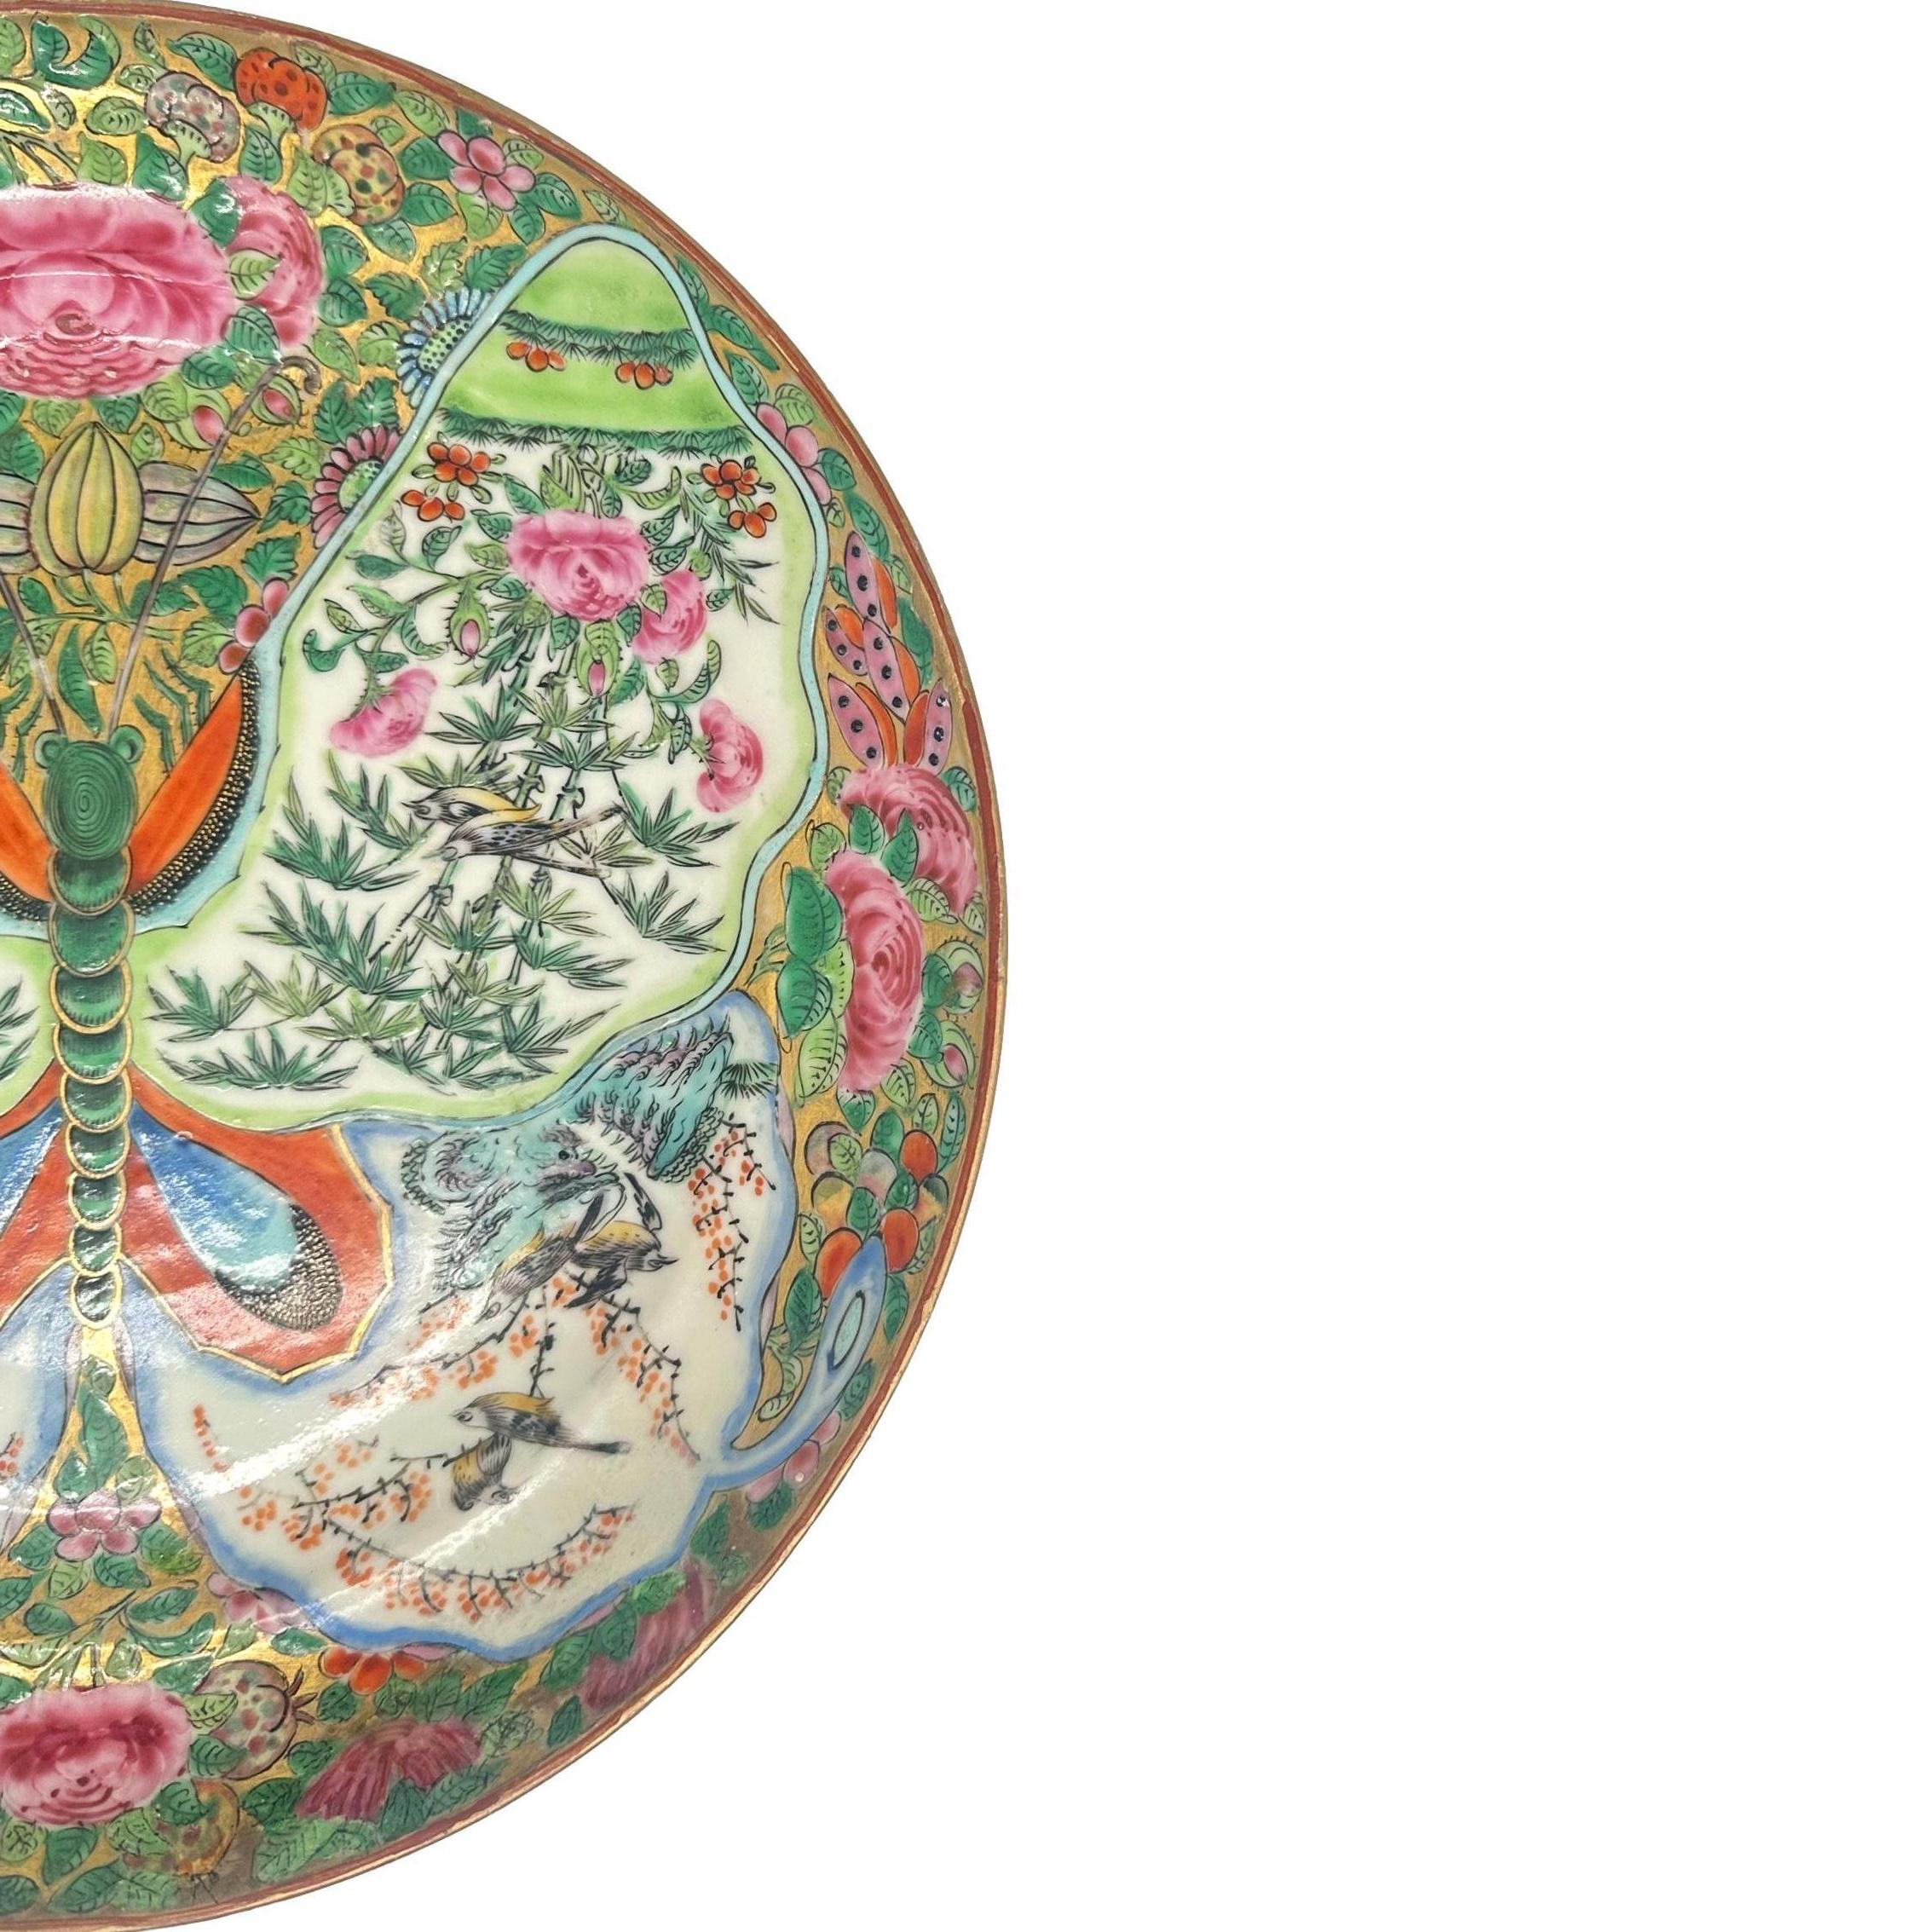 A Very Rare Chinese Export Canton Famille Rose Plate, Mid-Nineteenth Century, with a central large butterfly, its wings forming four roundels, the front wings with a pair of birds among bamboo and floral sprays, and the rear wings painted with